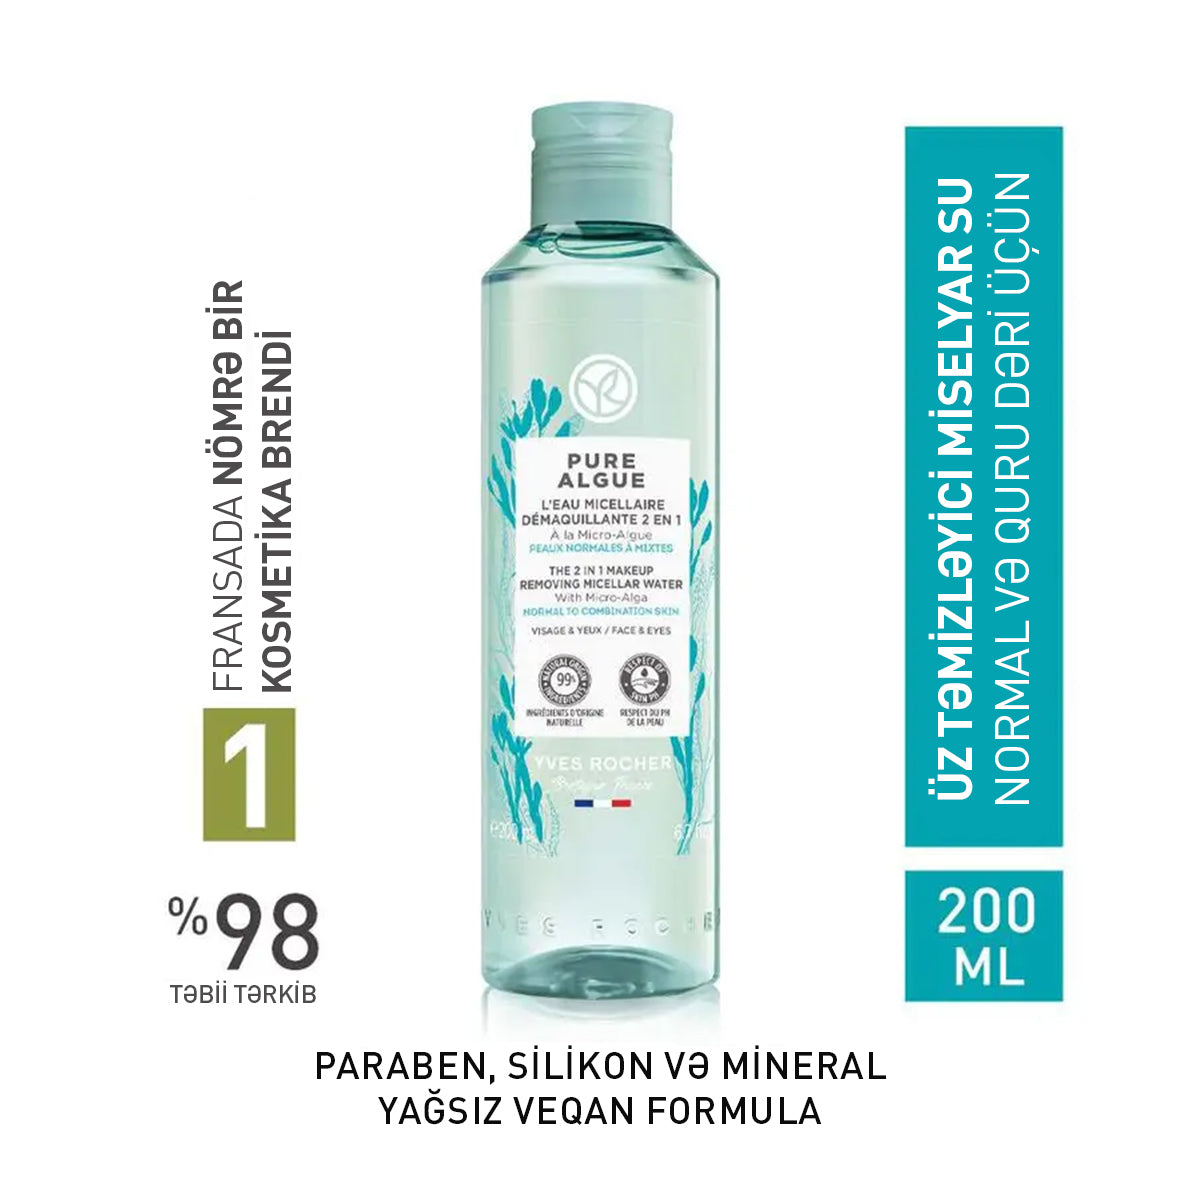 The 2 in 1 Makeup Removing Micellar Water Pure Algue - 200ml